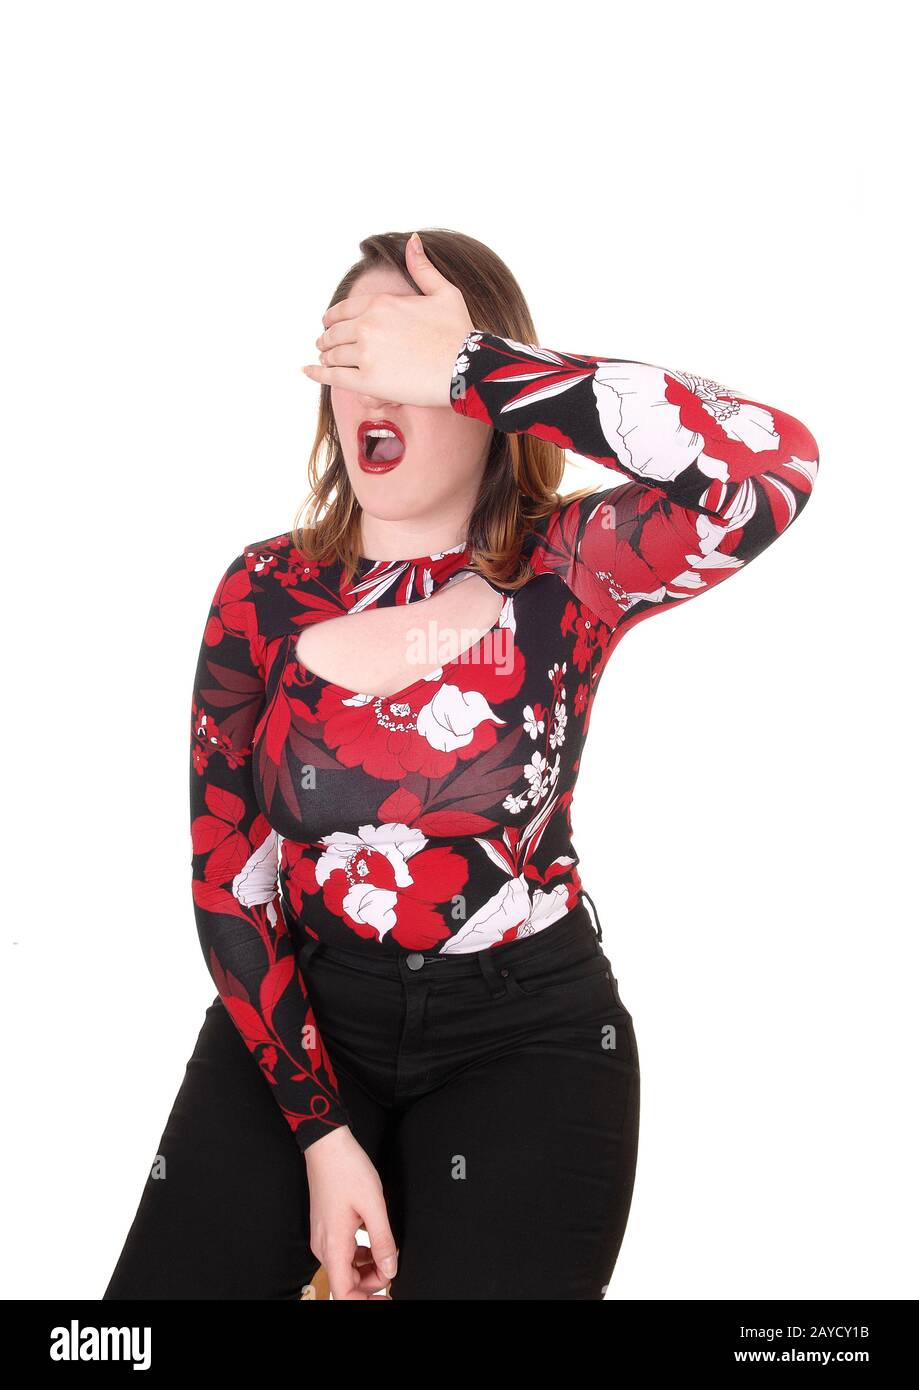 Woman screaming with her hands over her eyes Stock Photo